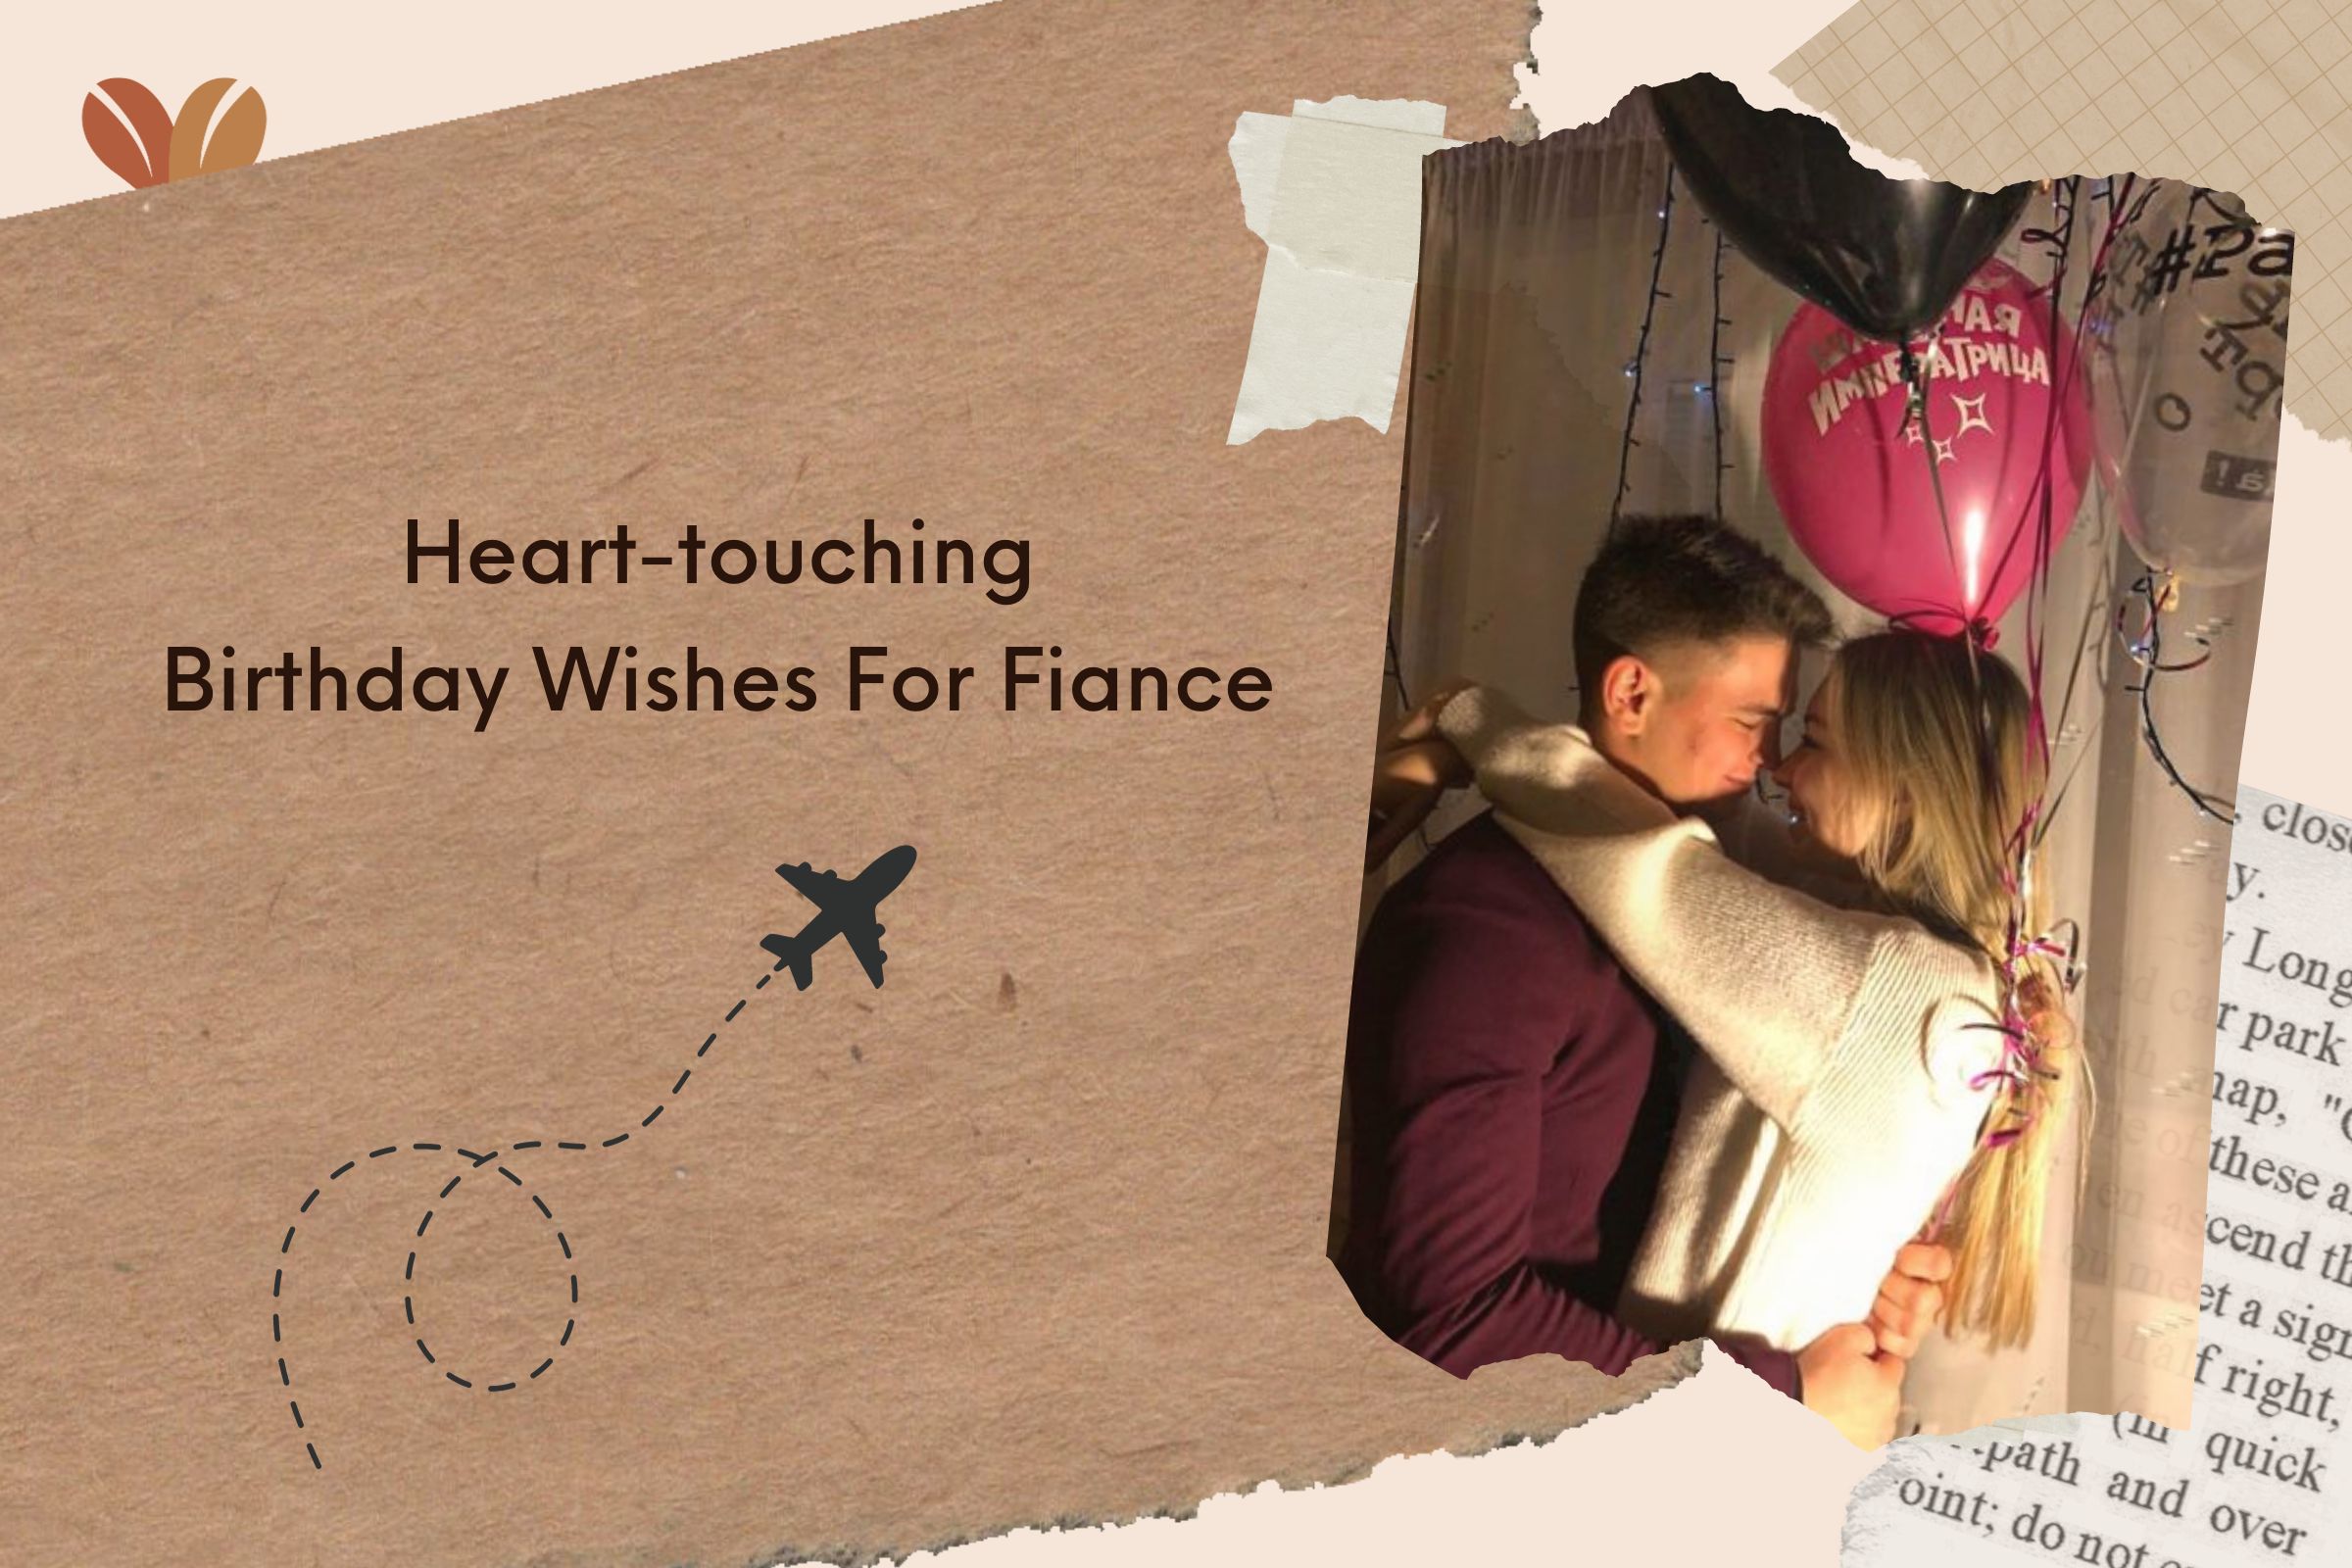 Heart-touchingBirthday Wishes For Fiance